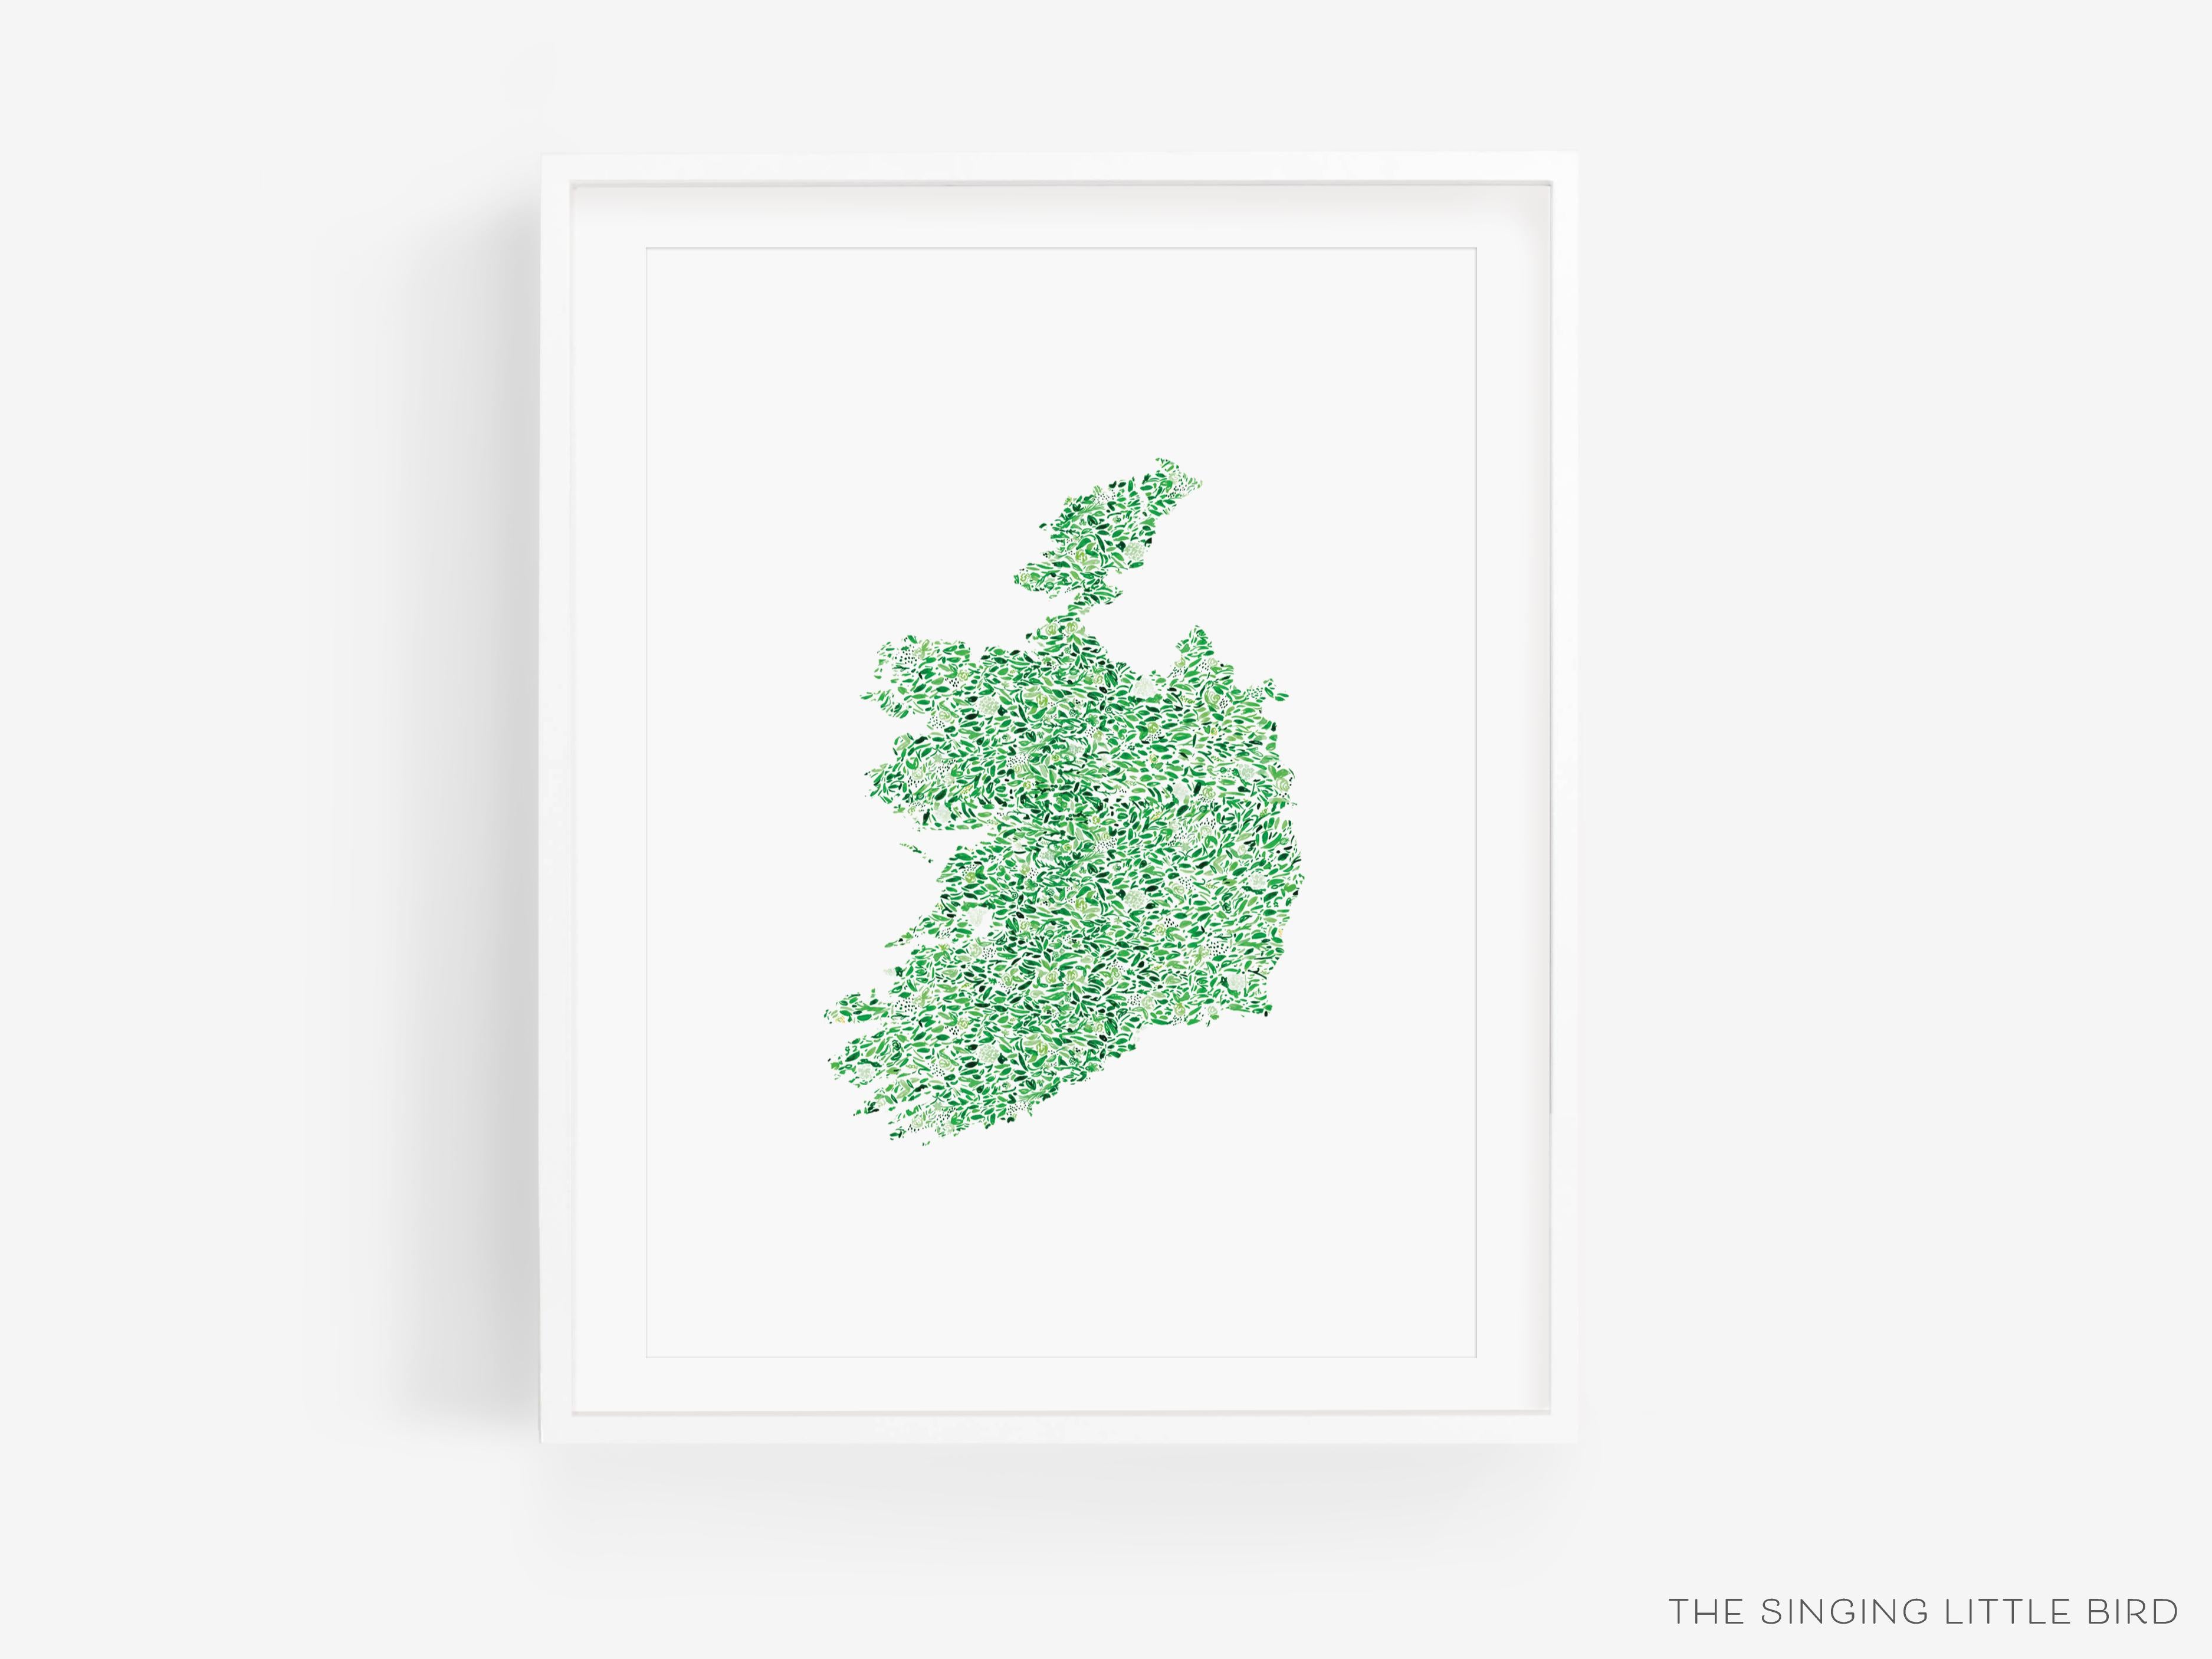 Ireland Art Print-This watercolor art print features our hand-painted floral pattern in the shape of Ireland, printed in the USA on 120lb high quality art paper. This makes a great gift or wall decor for the Irish lover in your life.-The Singing Little Bird